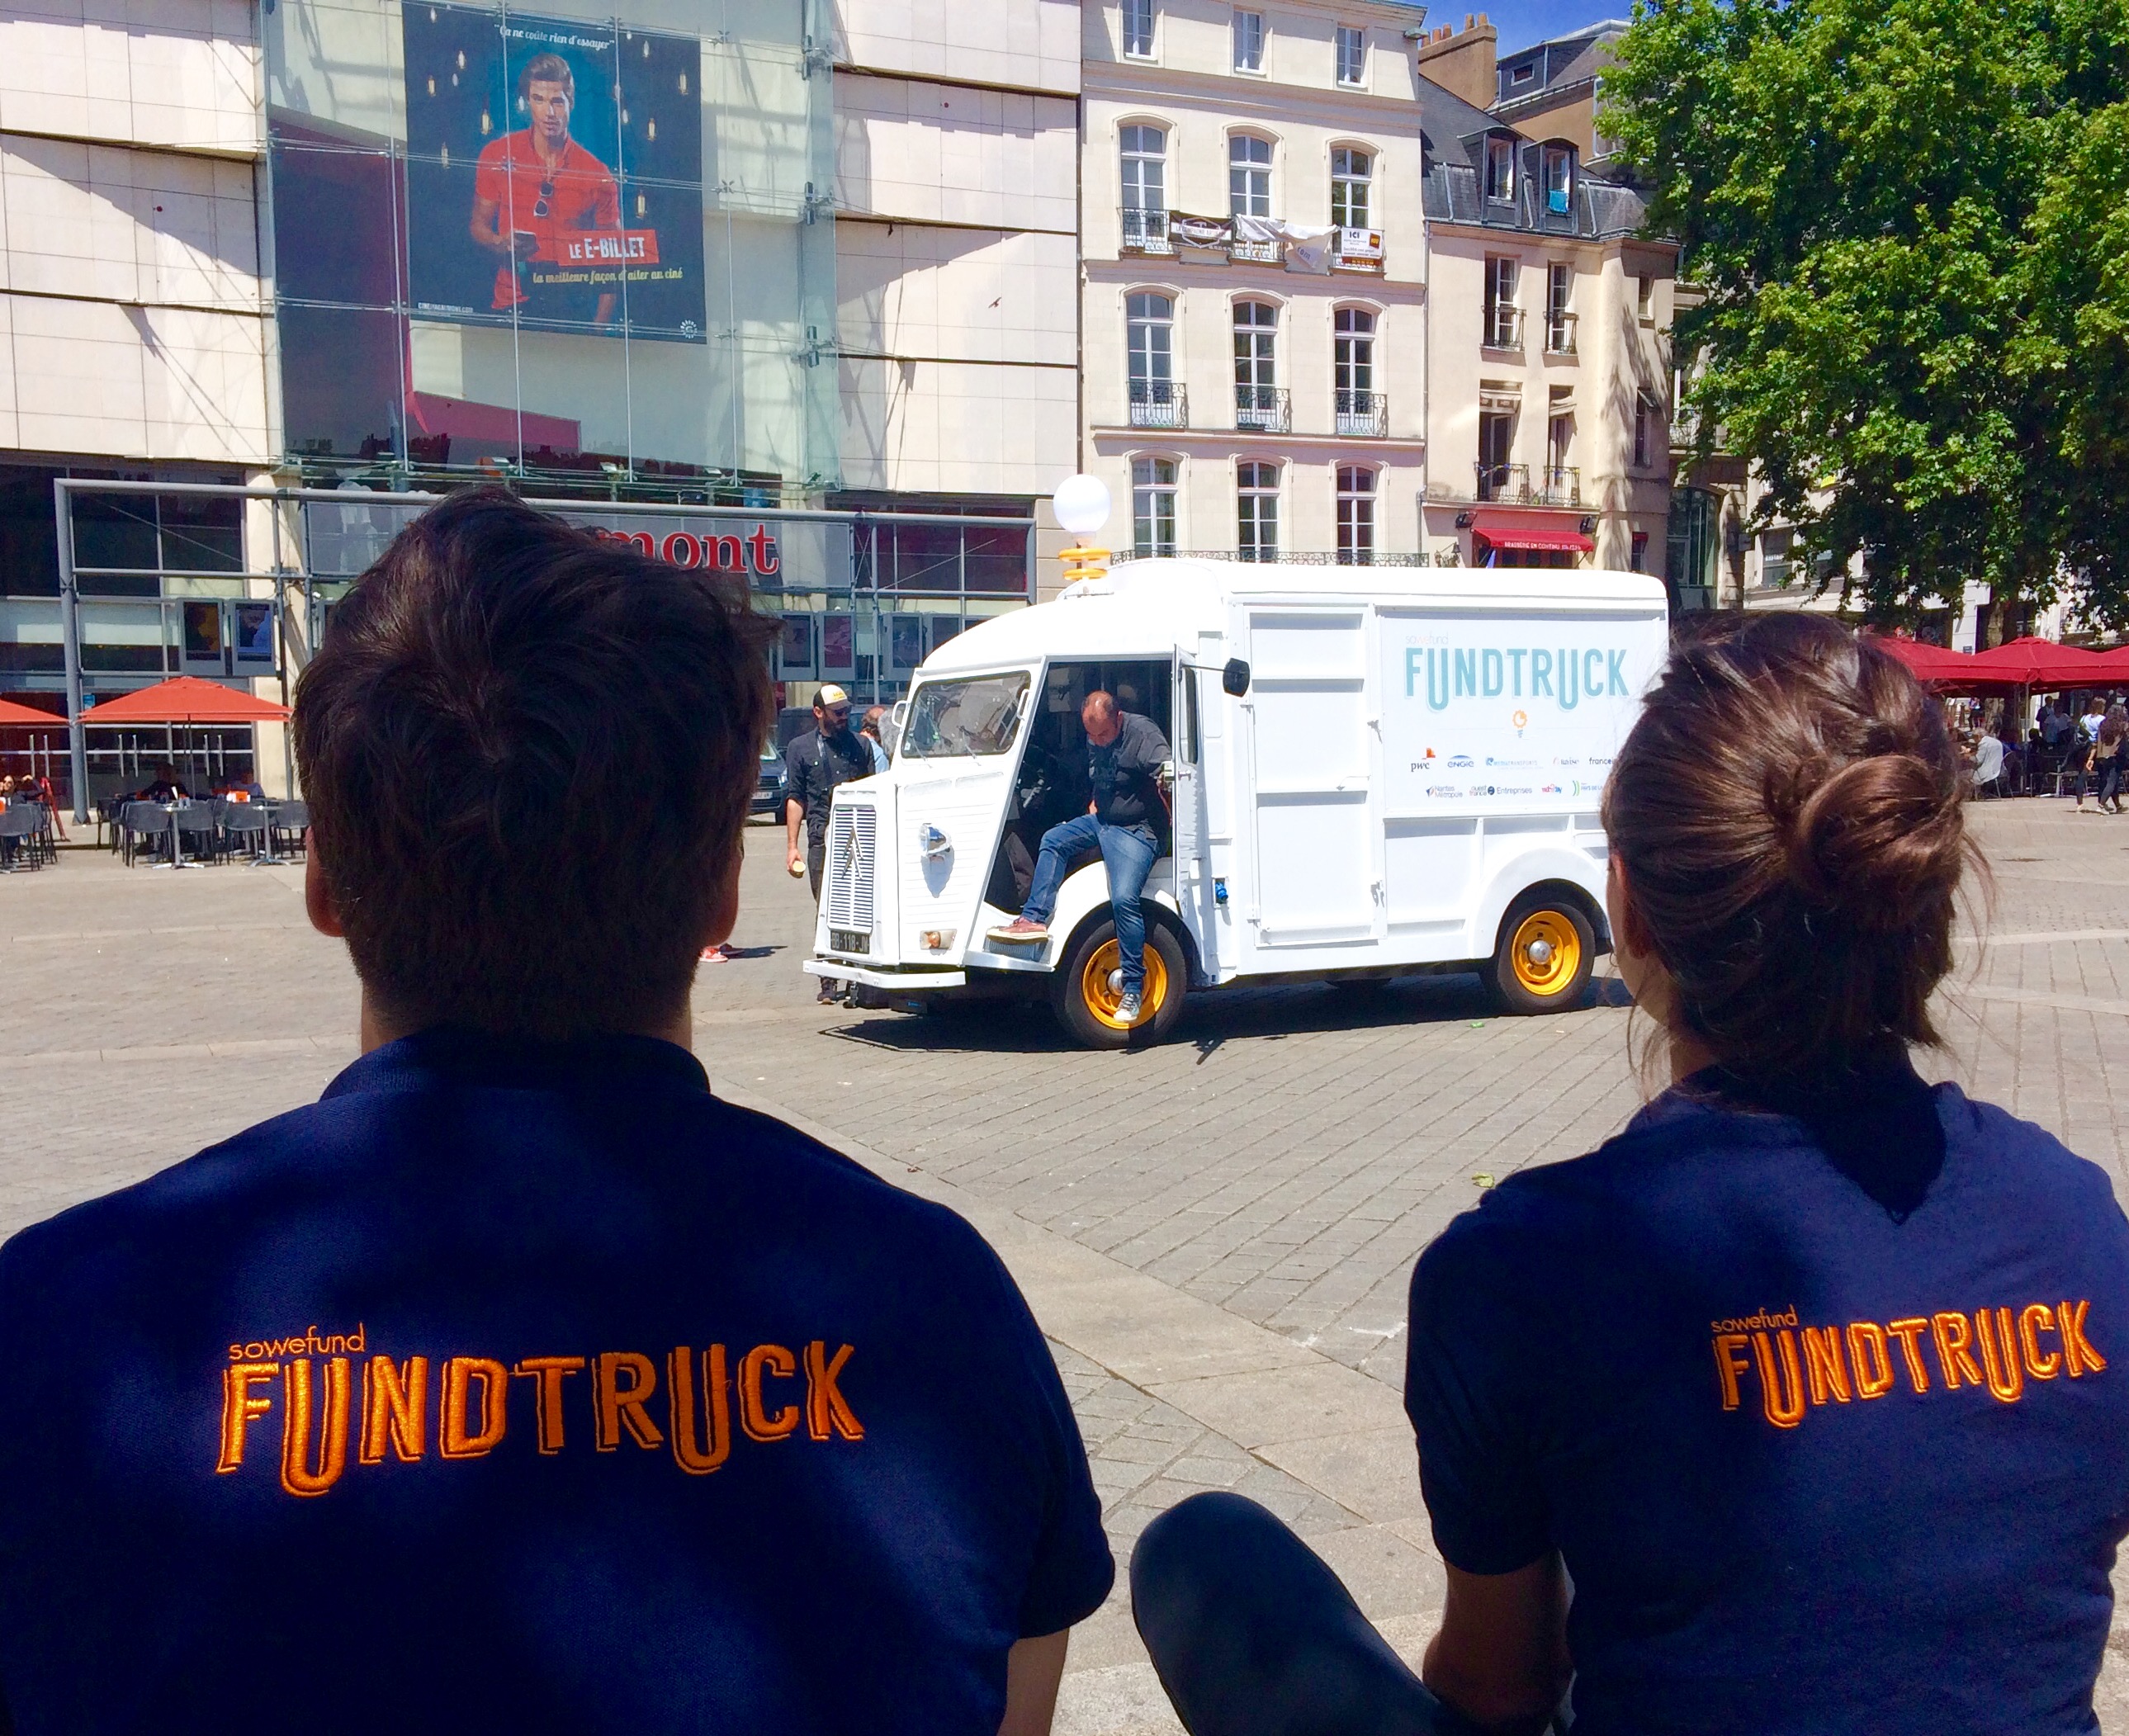 Le Fundtruck 2017 by Sowefund - GM Crowdfunding